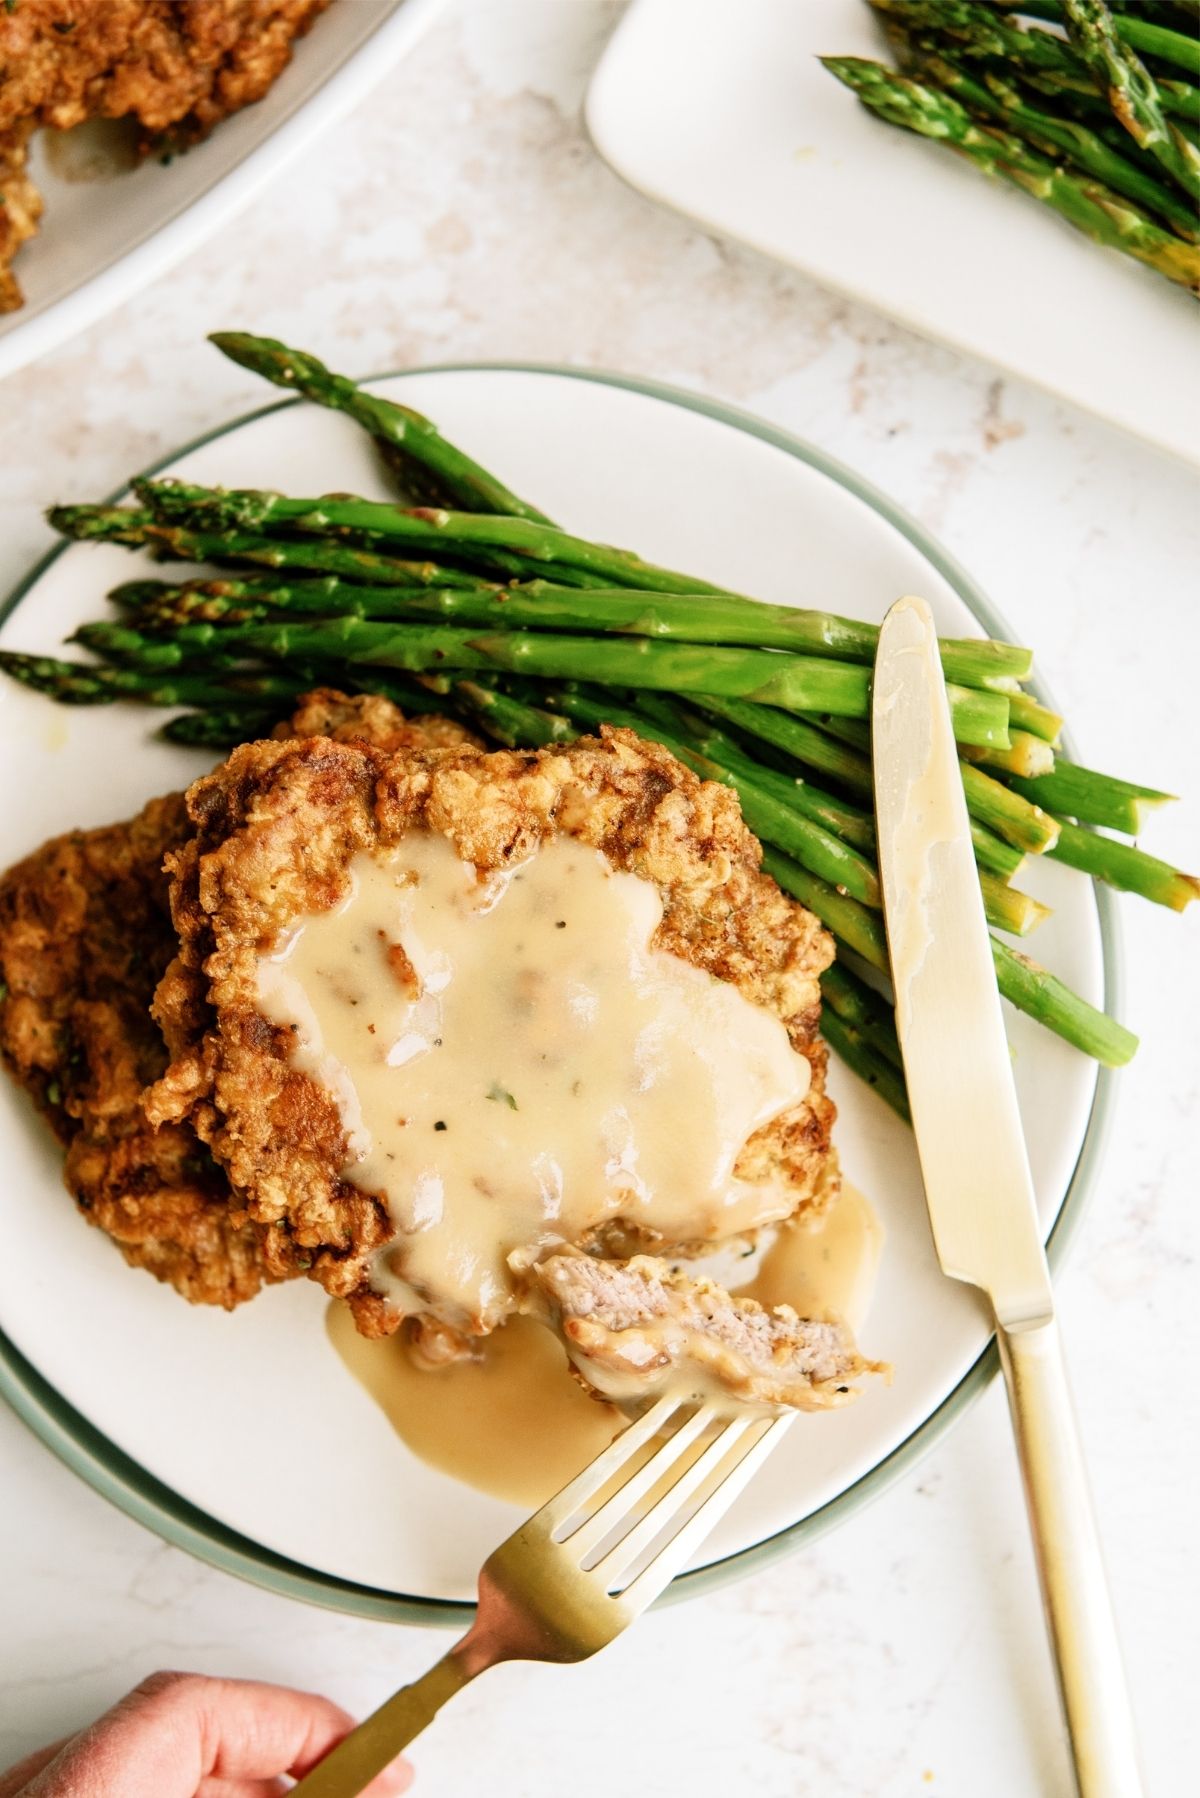 Chicken Fried Steak with Gravy on a plate with a fork and knife